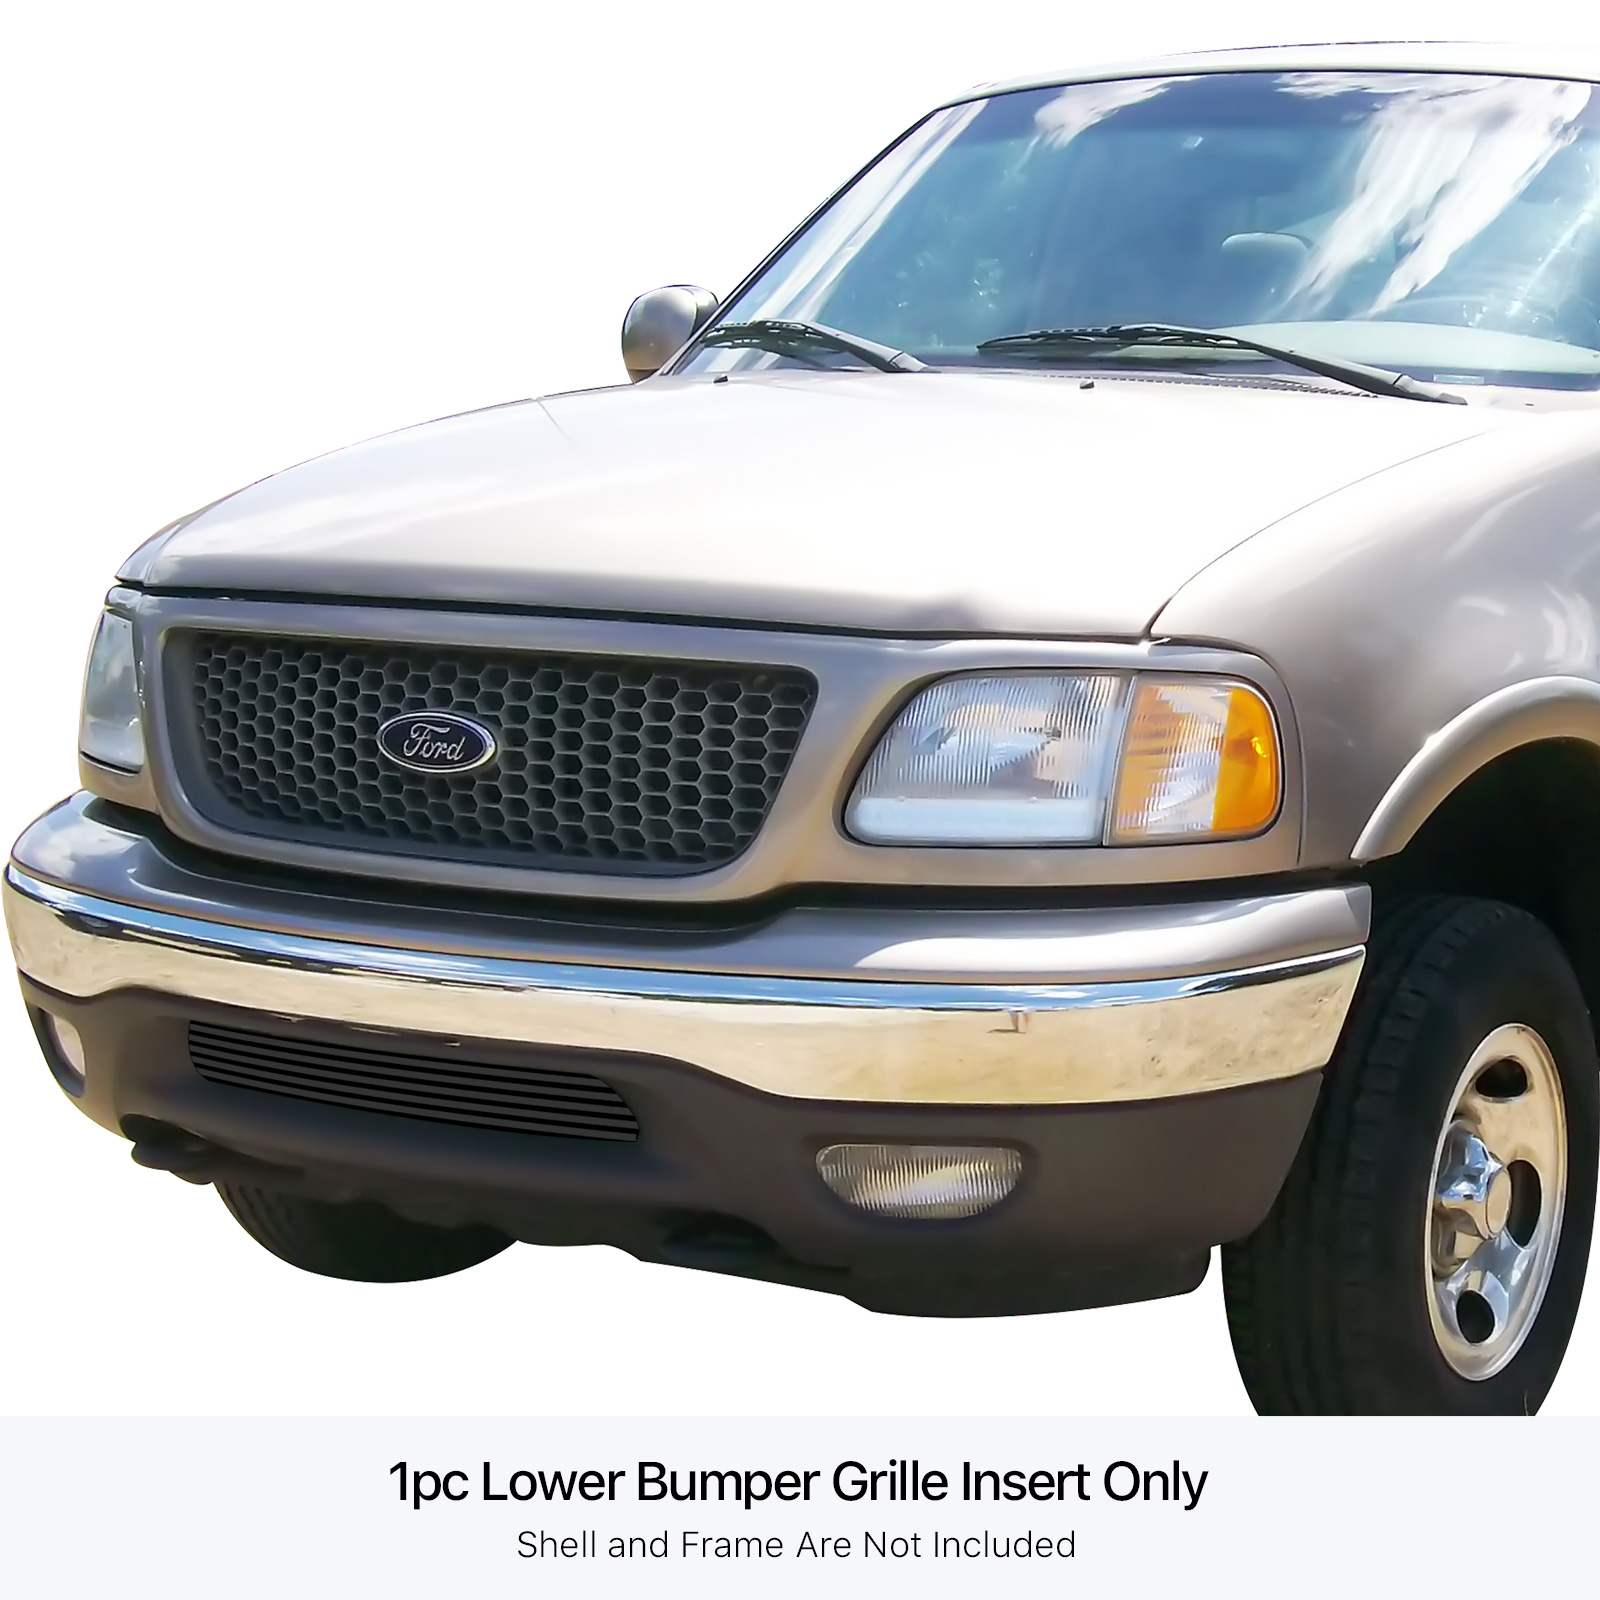 1999-2002 Ford Expedition 2WD /1999-2003 Ford F-150 2WD Not For Lightning LOWER BUMPER Black Stainless Steel Billet Grille